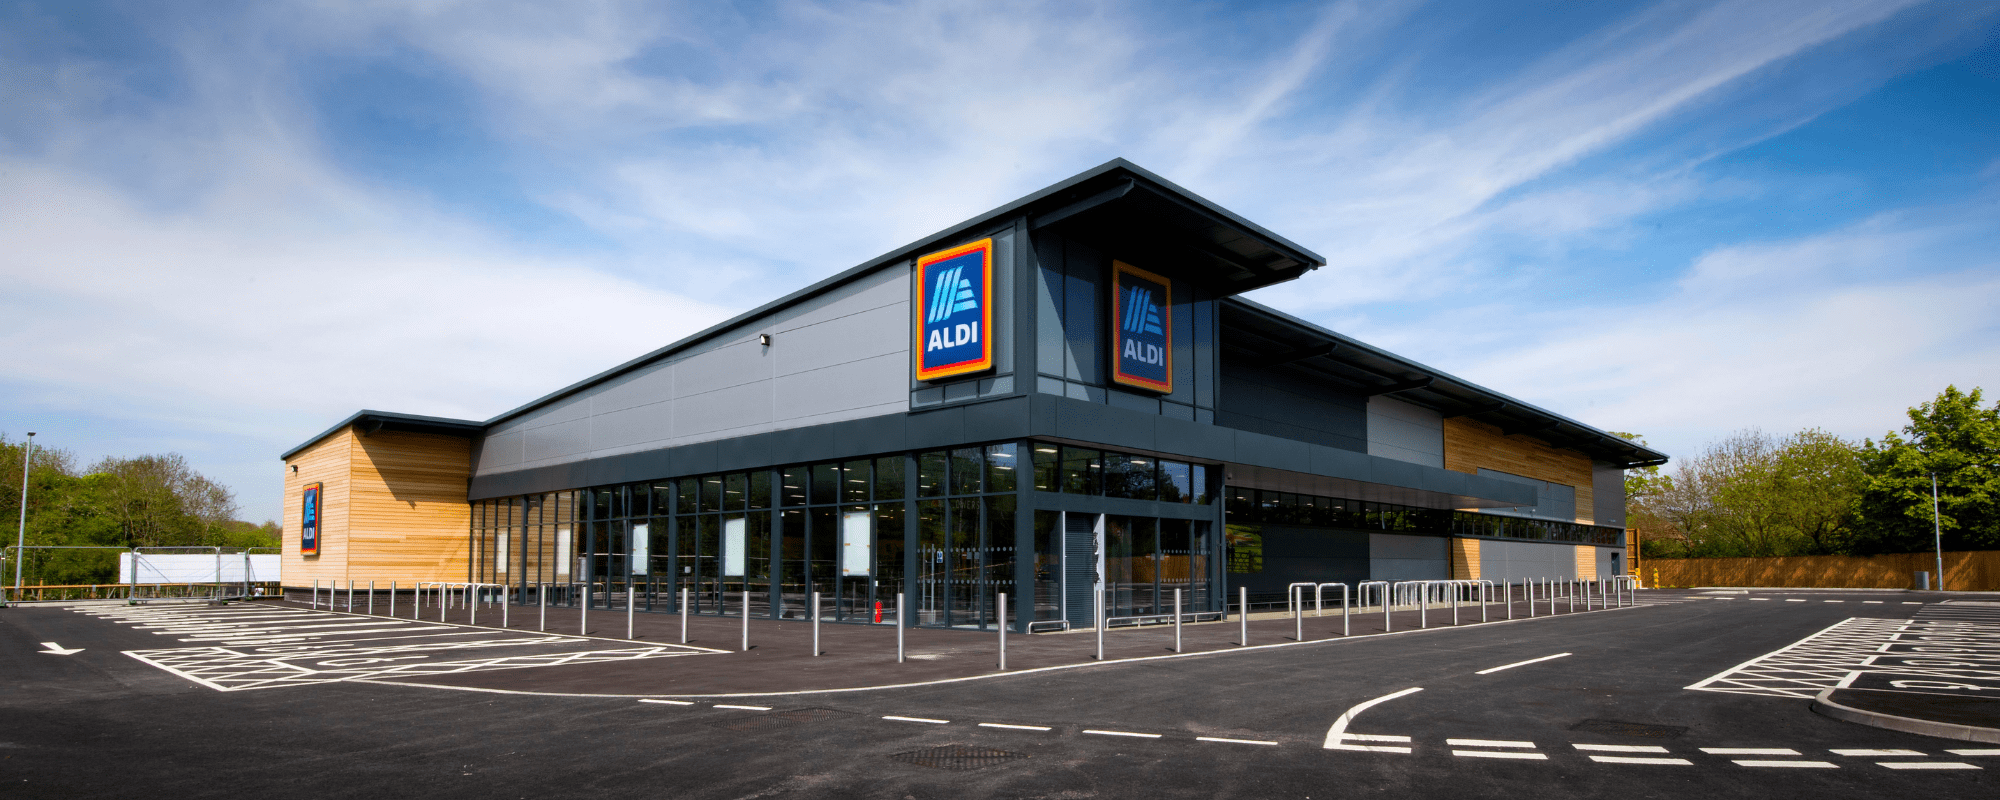 Aldi Whitchurch Wide External Image